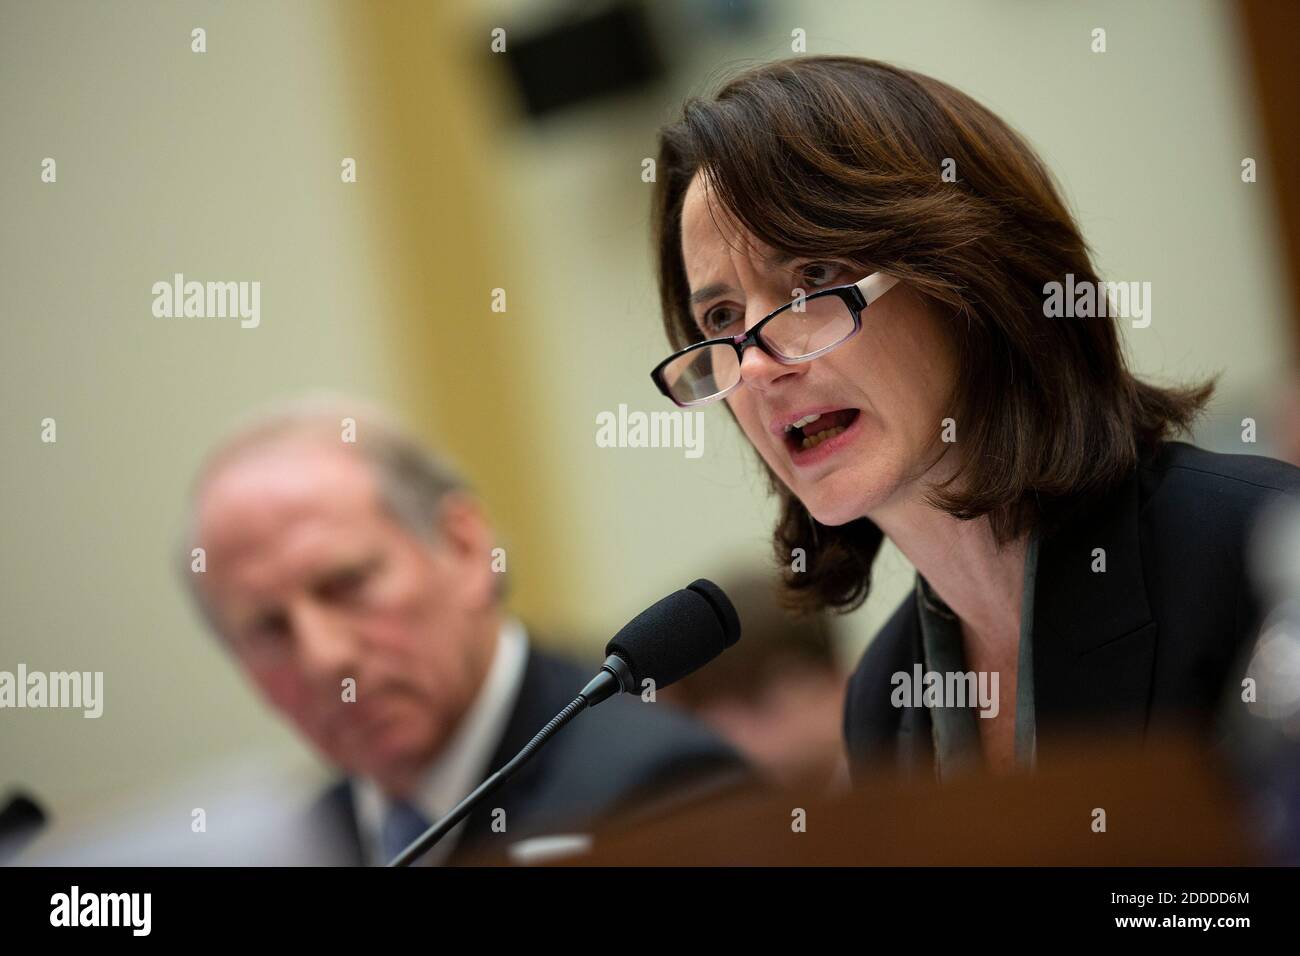 Avril Haines, Former Deputy National Security Advisor and Former Deputy Director of the Central Intelligence Agency, along with Richard Haass Ph.D., President of the Council on Foreign Relations, and Stephen J. Hadley, Former National Security Advisor, testify before the U.S. House Committee on Foreign Relations at the United States Capitol in Washington D.C., U.S., on Tuesday, January 14, 2020, following a U.S., drone strike that killed Iranian military leader Qasem Soleimani on January 3, 2020.  United States Secretary of State Mike Pompeo, who was supposed to be the key witness appearing be Stock Photo